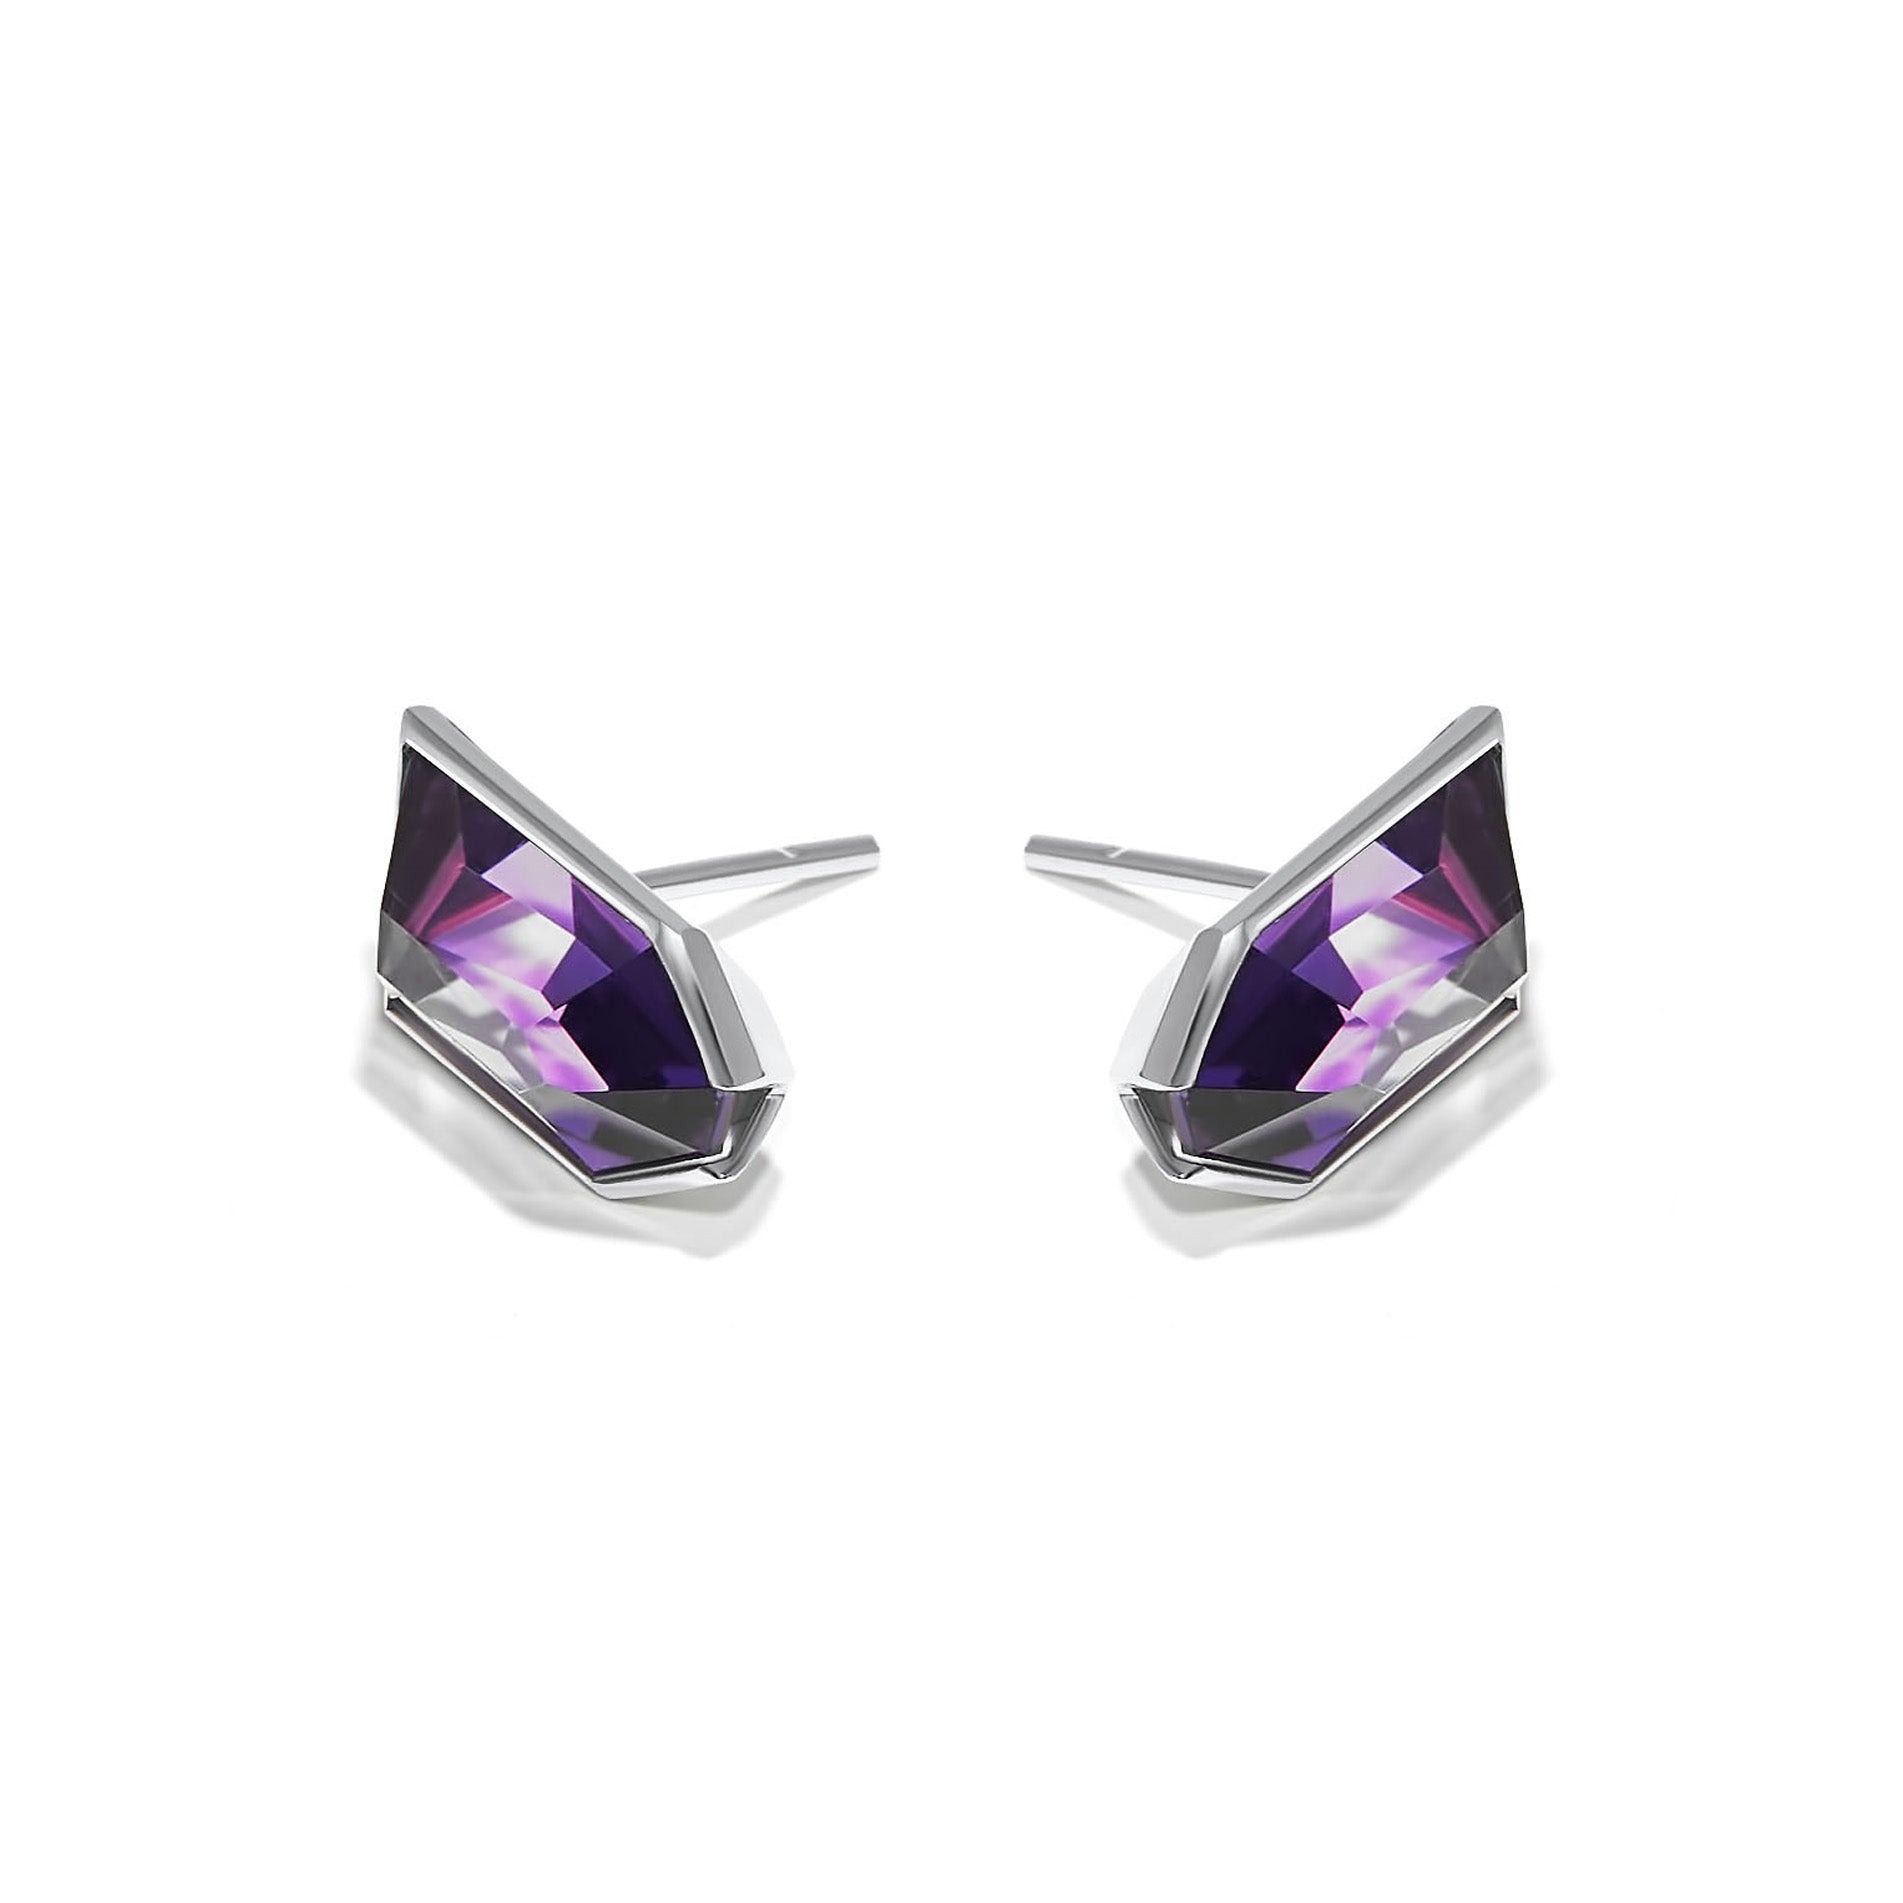 The Airborne Amethyst Earrings are a stunning piece of jewelry crafted with exquisite attention to detail. These earrings are made of high-quality 18K white gold, adding a touch of elegance and sophistication to the design. The use of white gold enhances the overall beauty and durability of the earrings.